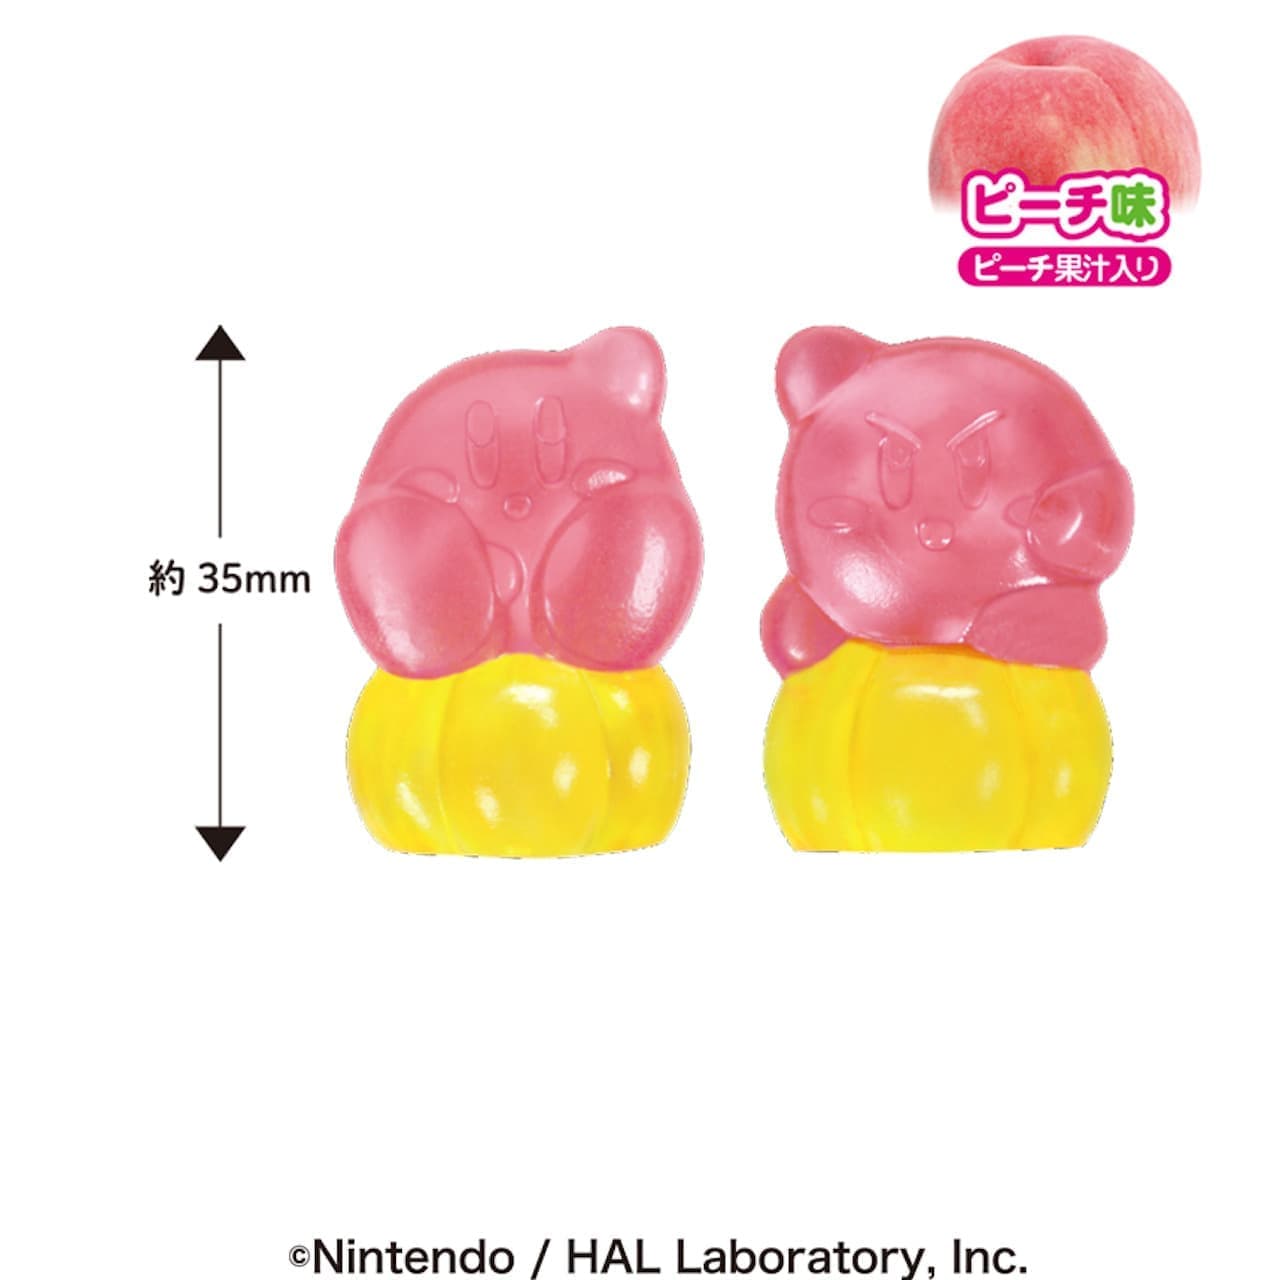 4D Gummies/Kirby the Star" from Heart